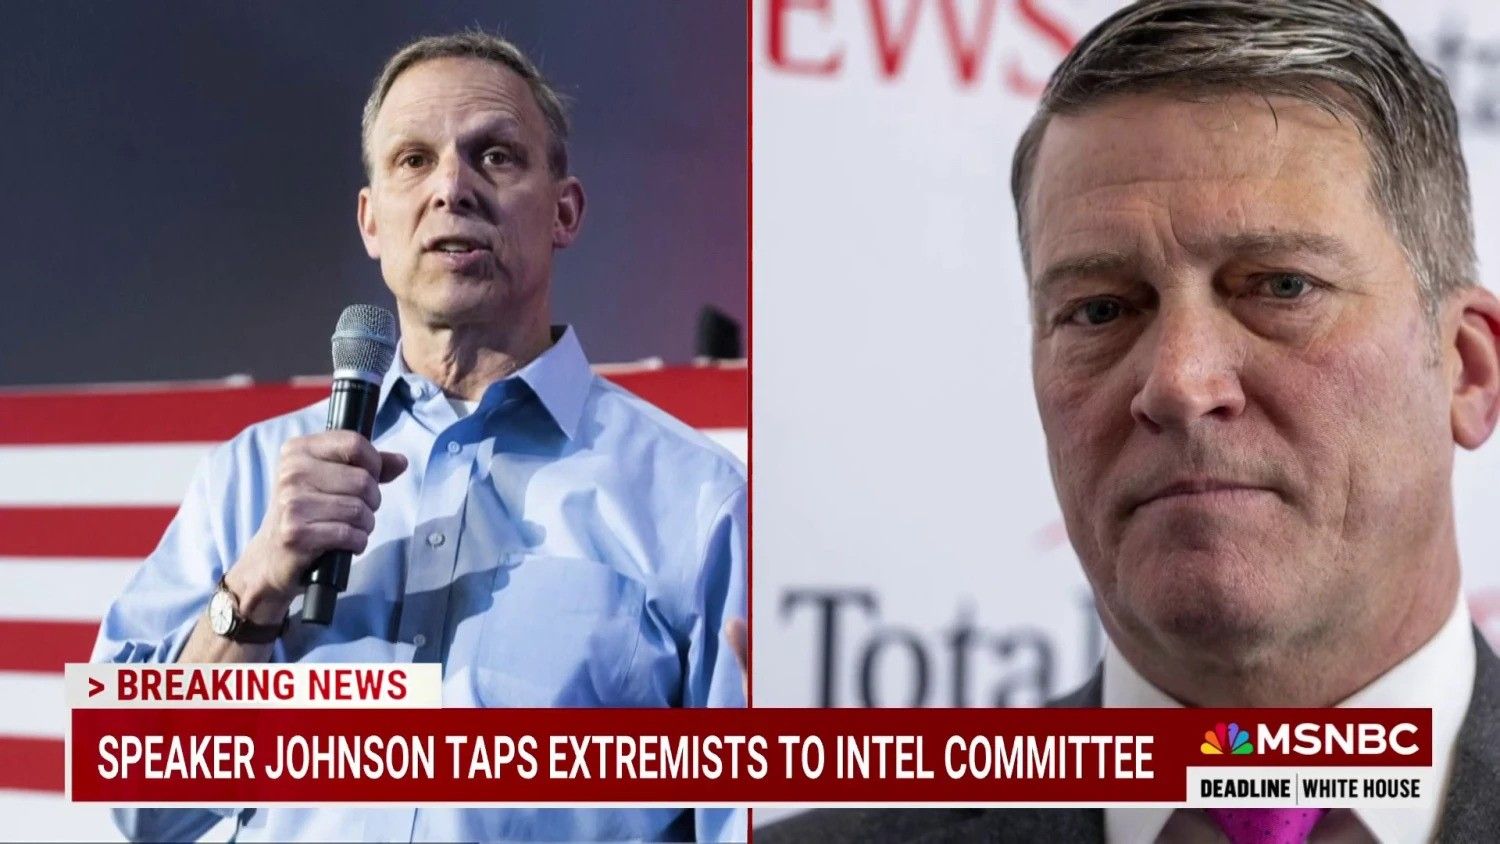 Speaker Johnson Appoints Extremists To Intel Committee [Video]